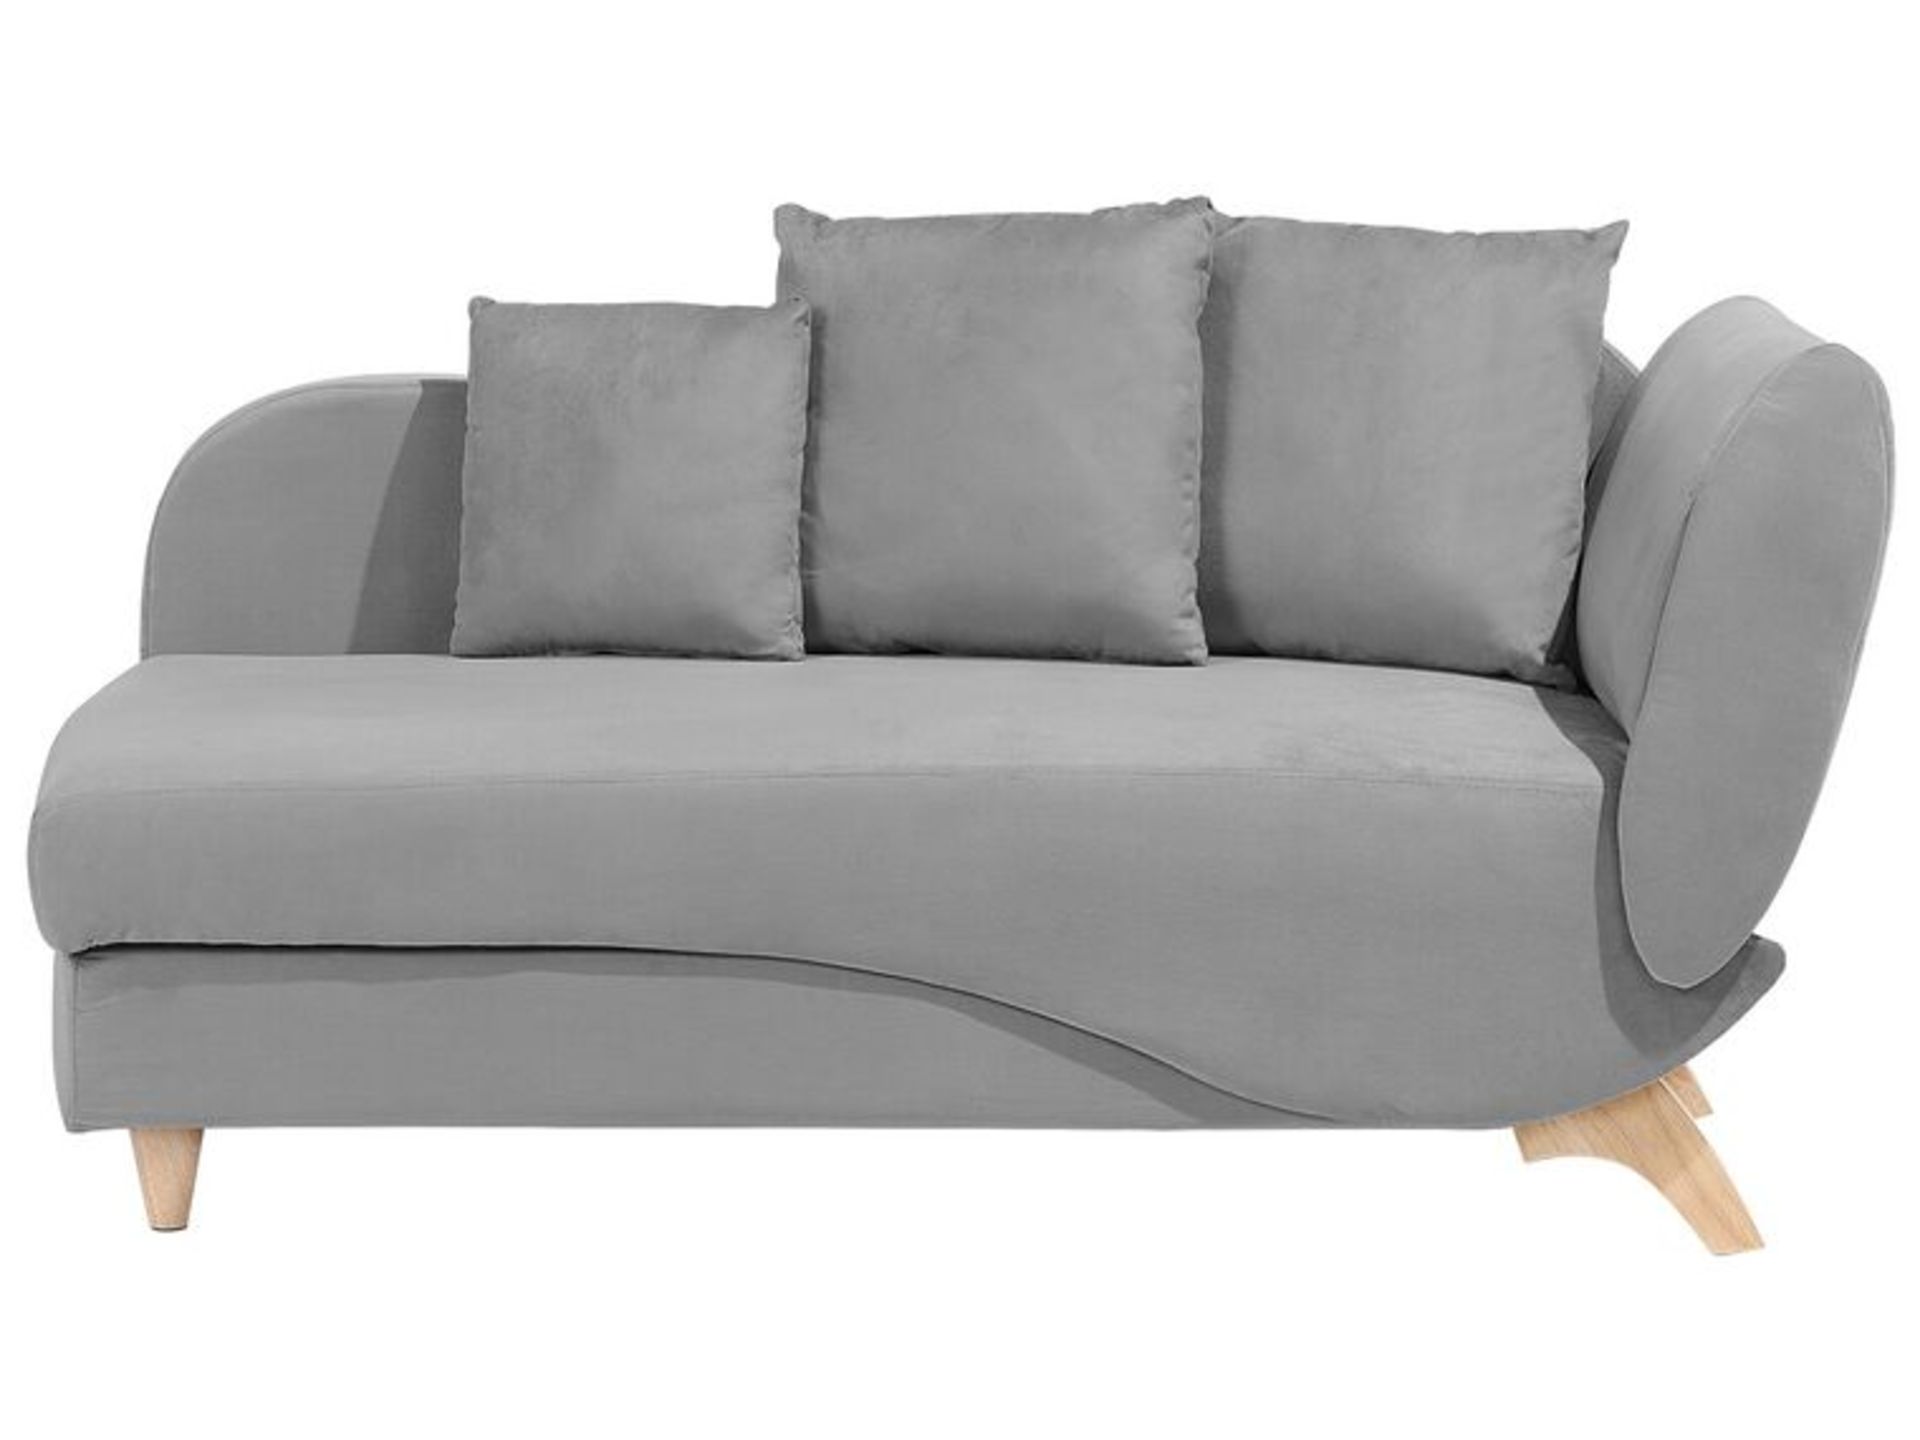 Meri Right Hand Velvet Chaise Lounge with Storage Light Grey. - SR6. RRP £499.99. This classic two-